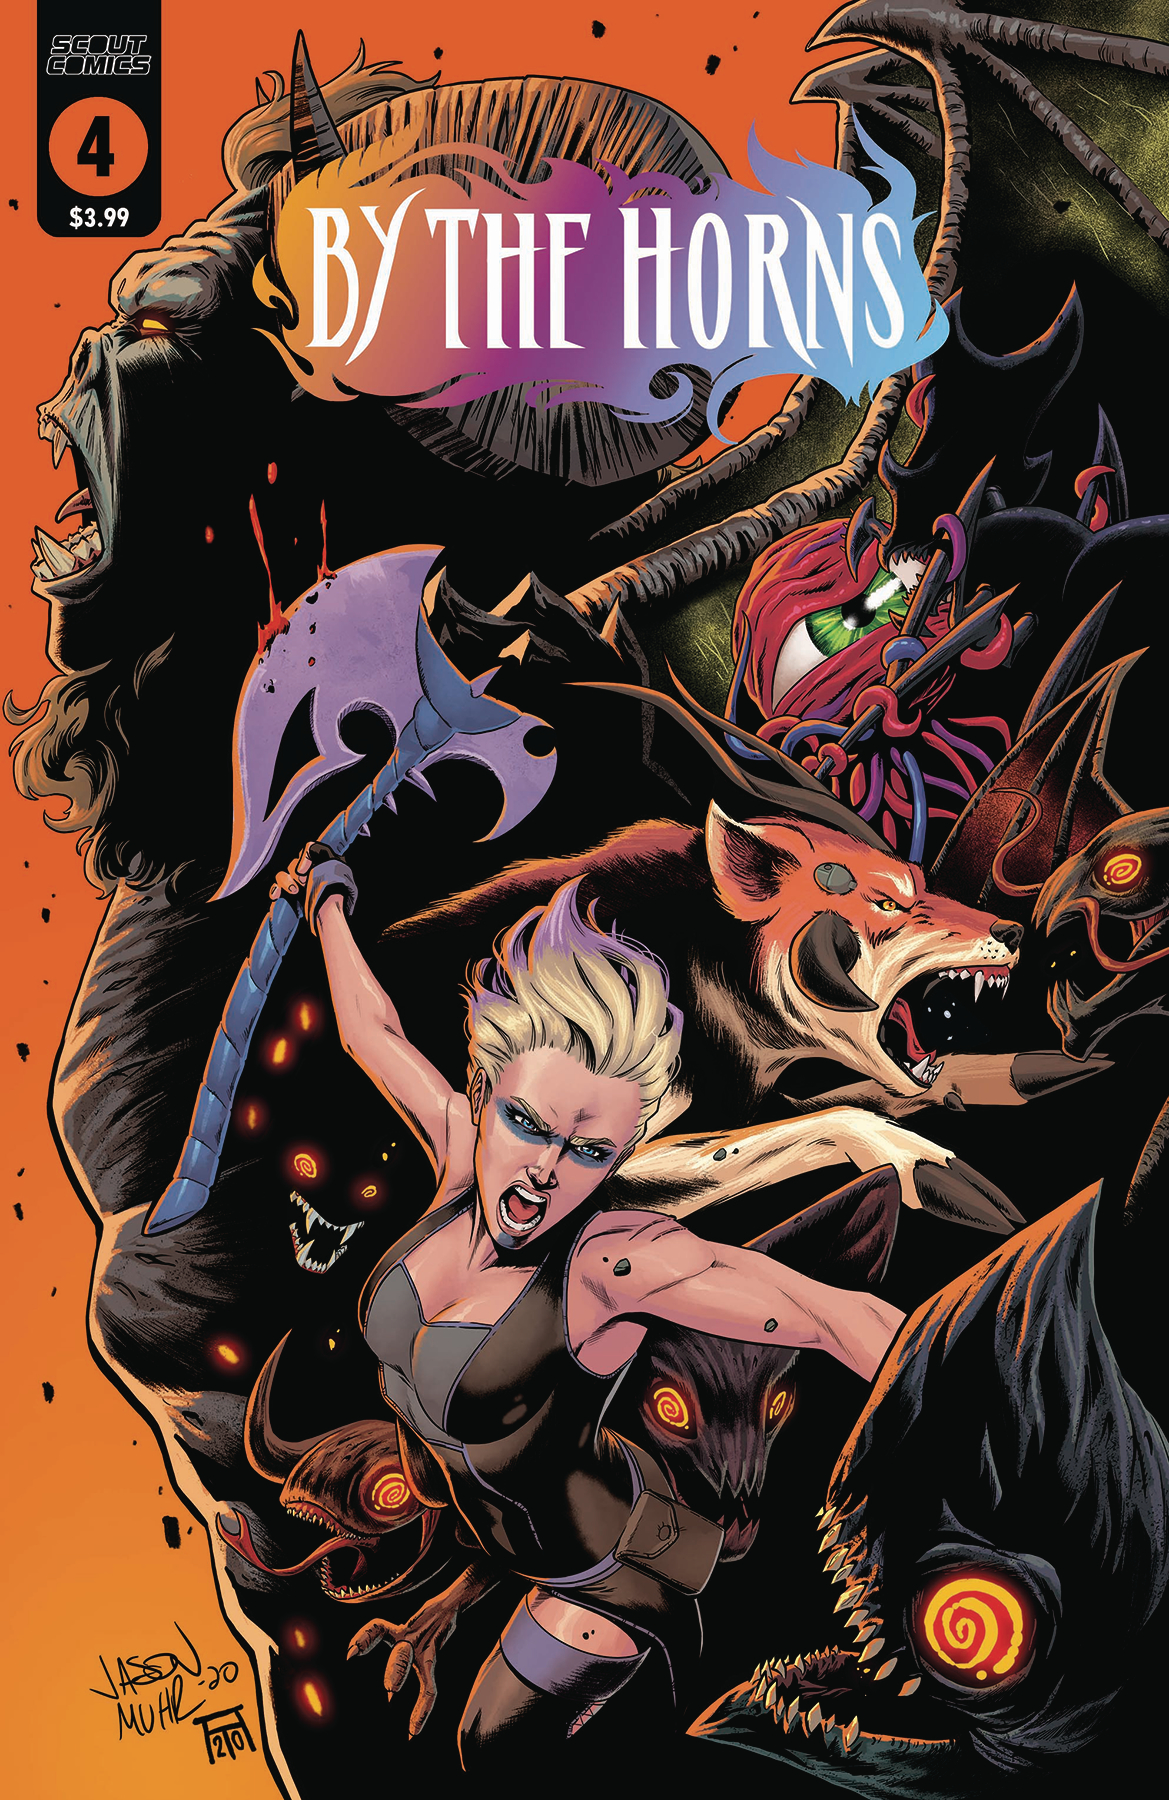 By The Horns #4 Cover A Muhr (Mature) (Of 7)